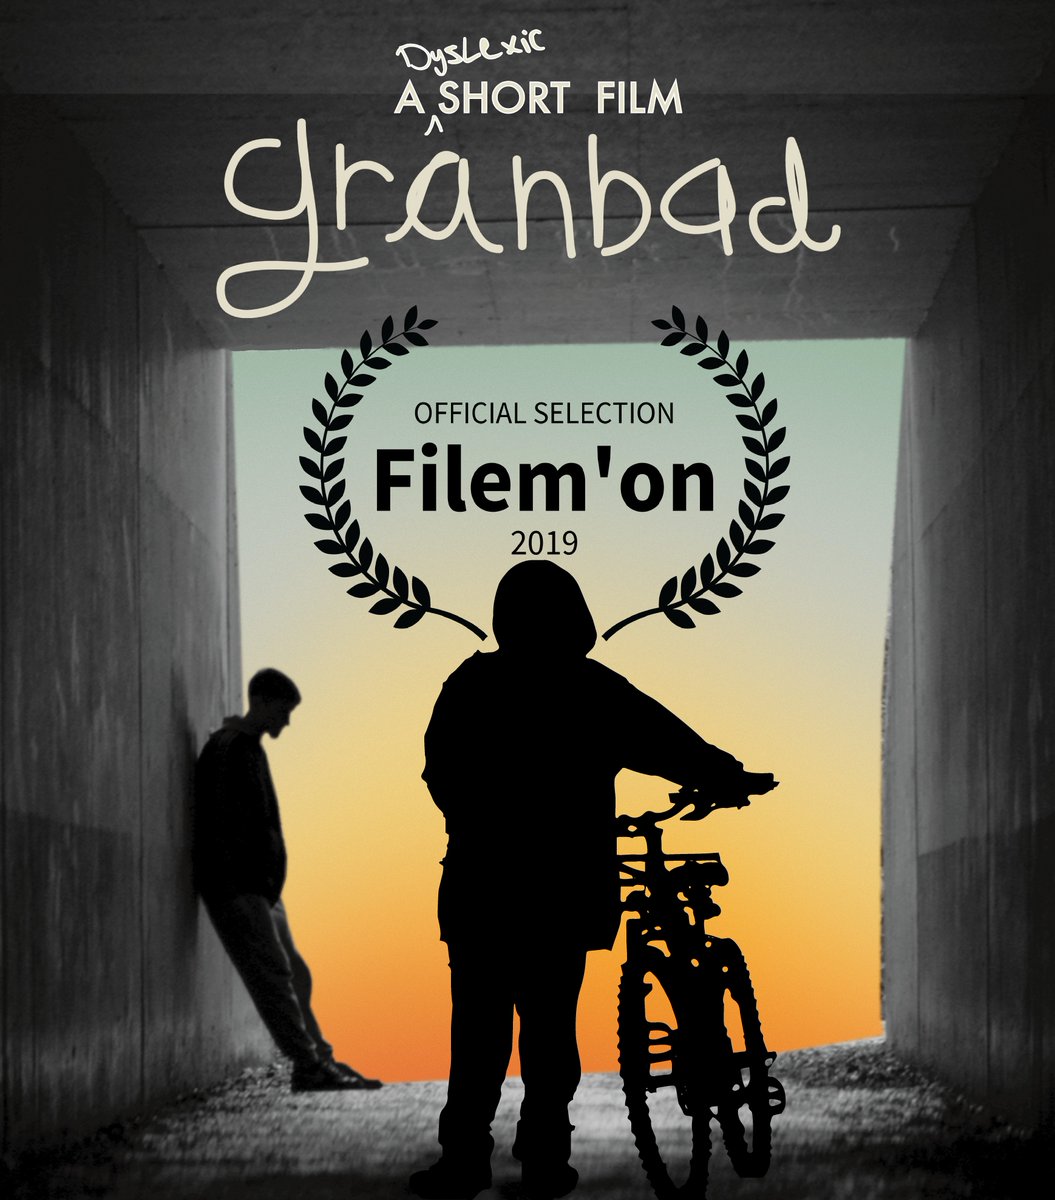 #Granbad will screen at #FilemOnFilmFestival which takes place this week in #Brussels and #Ghent. This is the film's #BelgiumPremiere 📽❤️🤩. It is entered into the 'ECFA Award' European Short. @GranbadFilm @morduepictures  @festivalformula